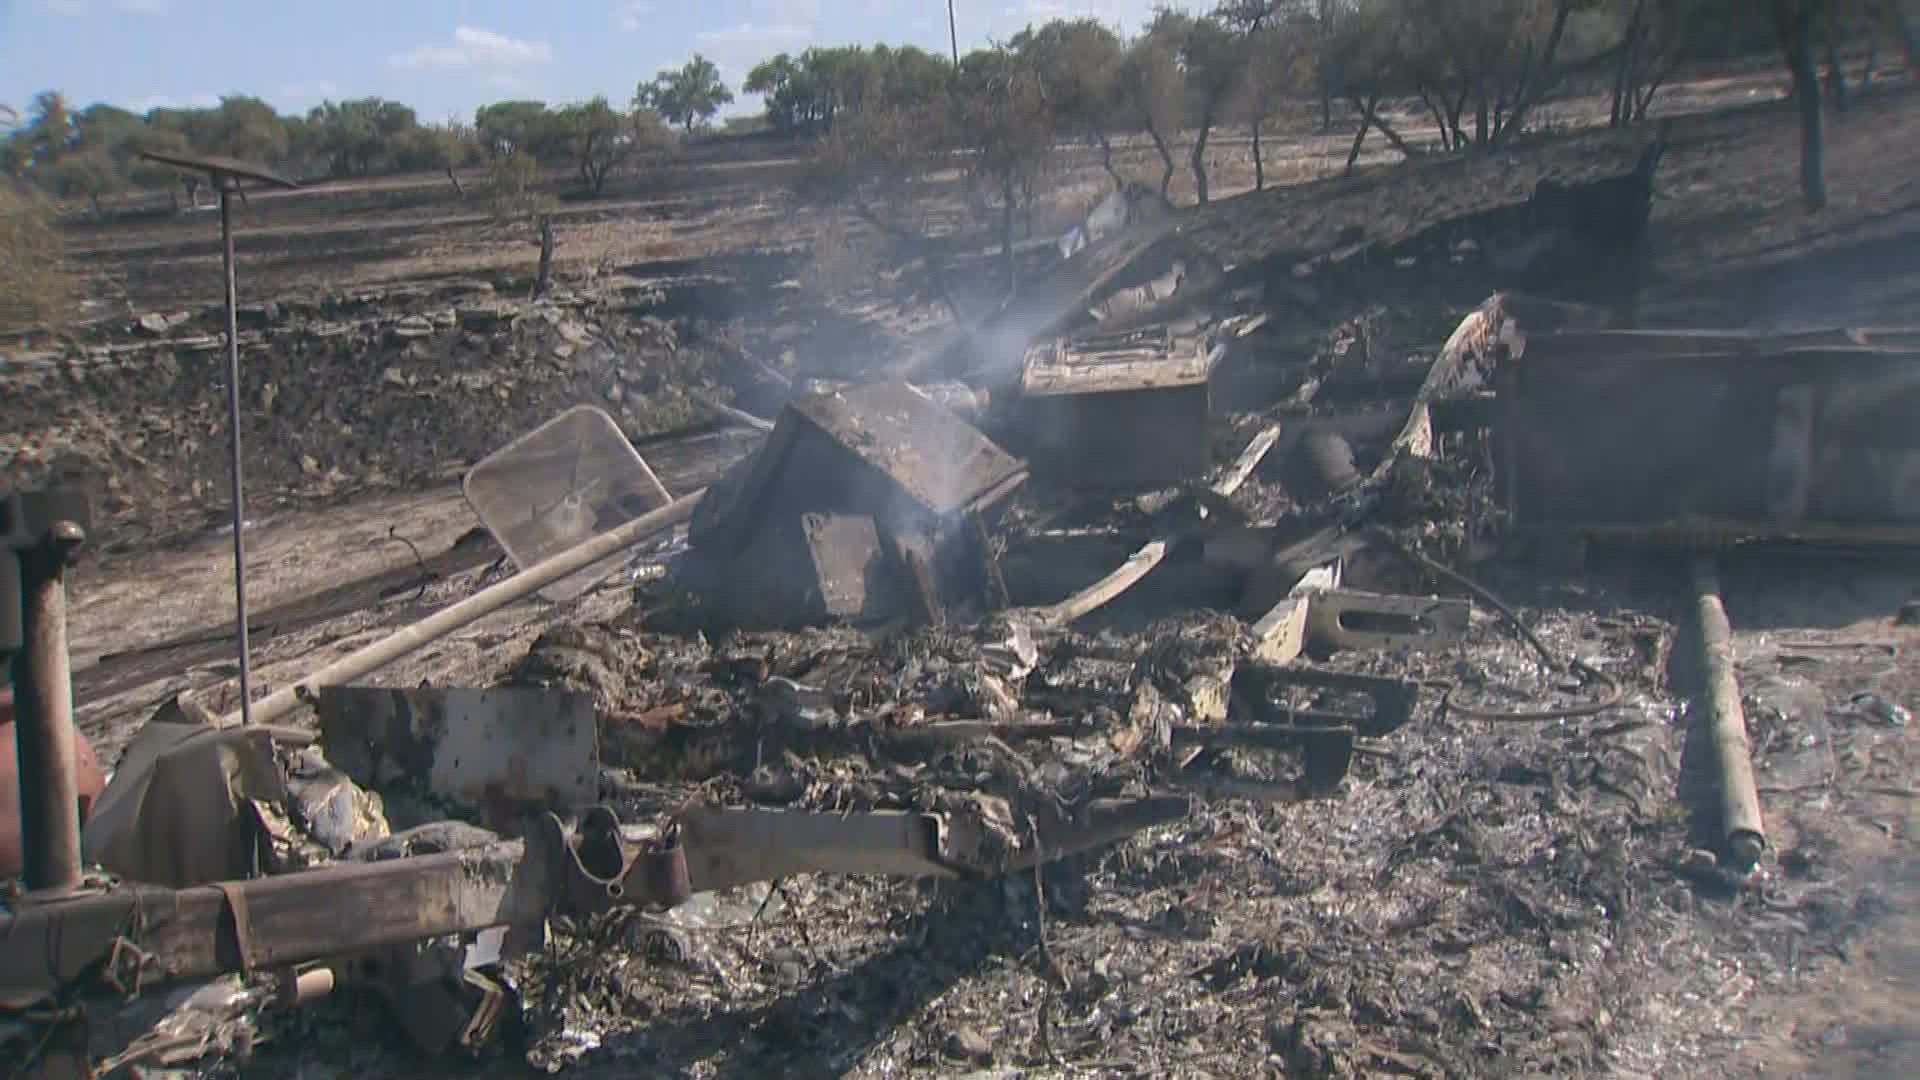 One family told KVUE they lost their RV in the fire. The fire is burning off RM 165 in Blanco County.